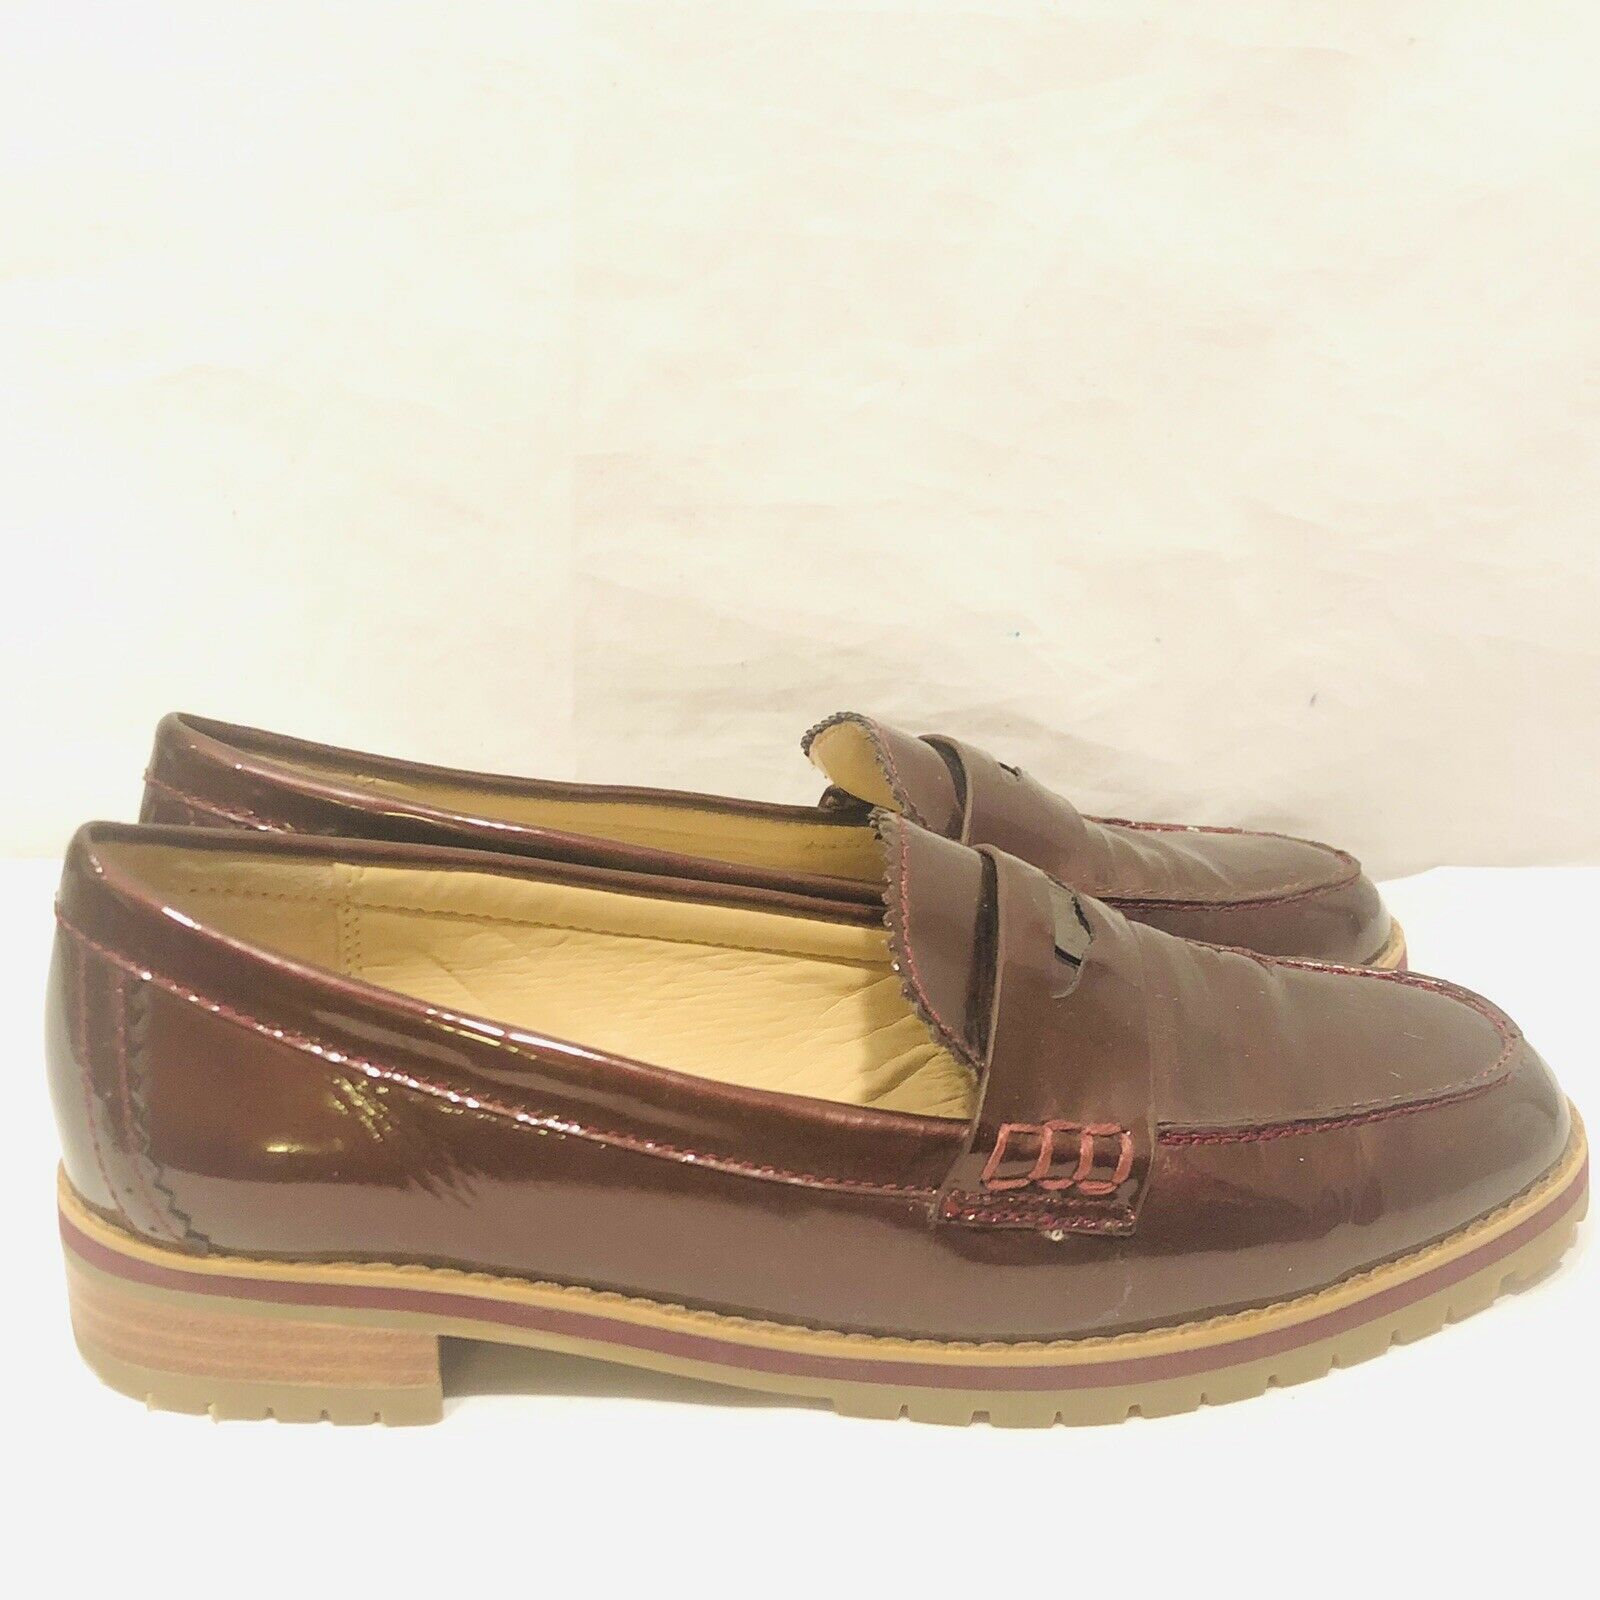 Coach Peyton Penny Loafers Womens Burgundy Patent Leather size 8B ...